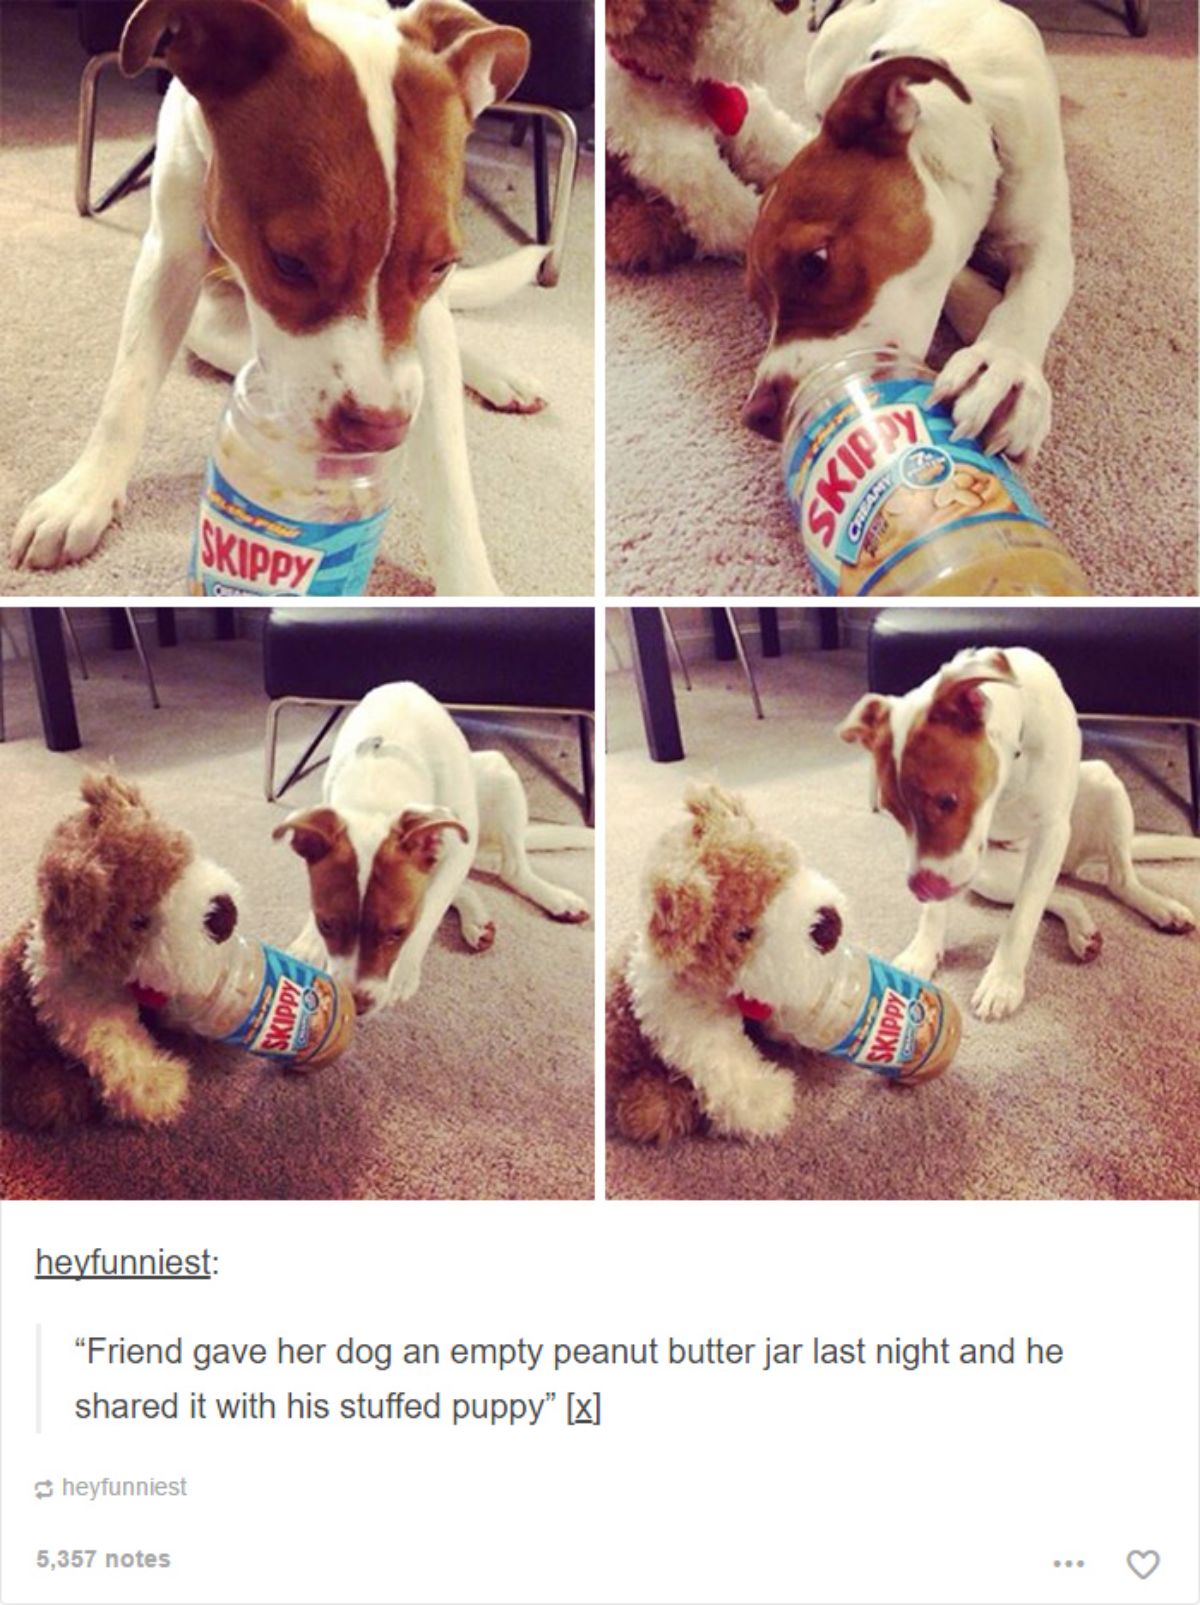 tumblr post of a brown and white pitbull sharing a peanut butter jar with a brown and white teddy bear